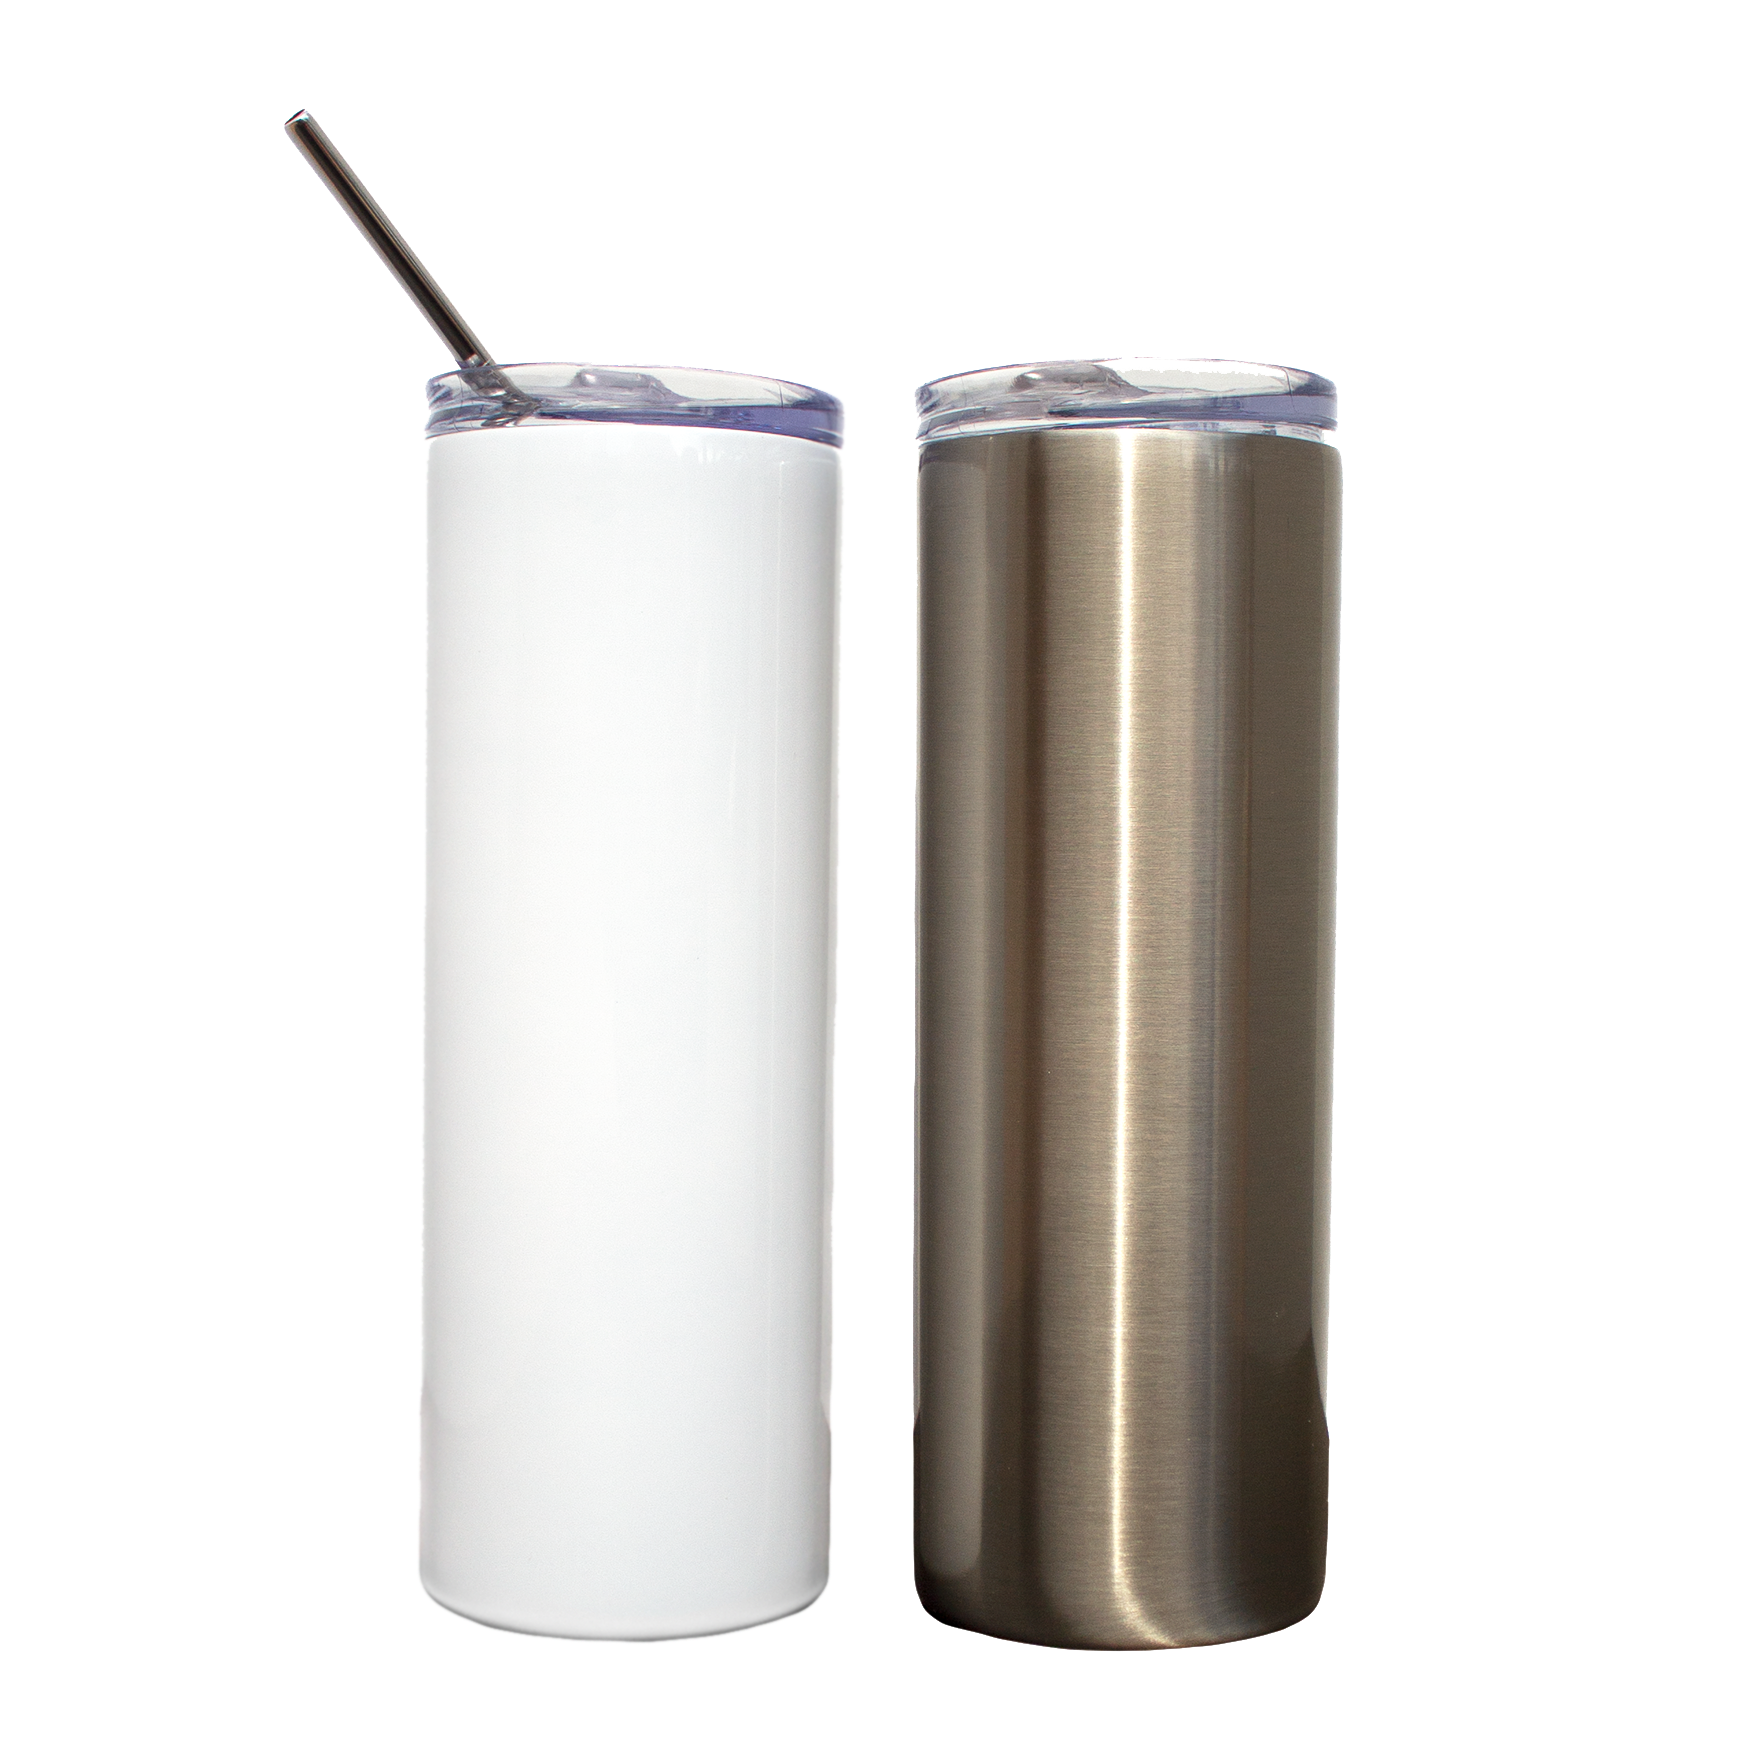 Blank Customizable 20oz Stainless Steel Tumbler - Clear Lid and Straw Included